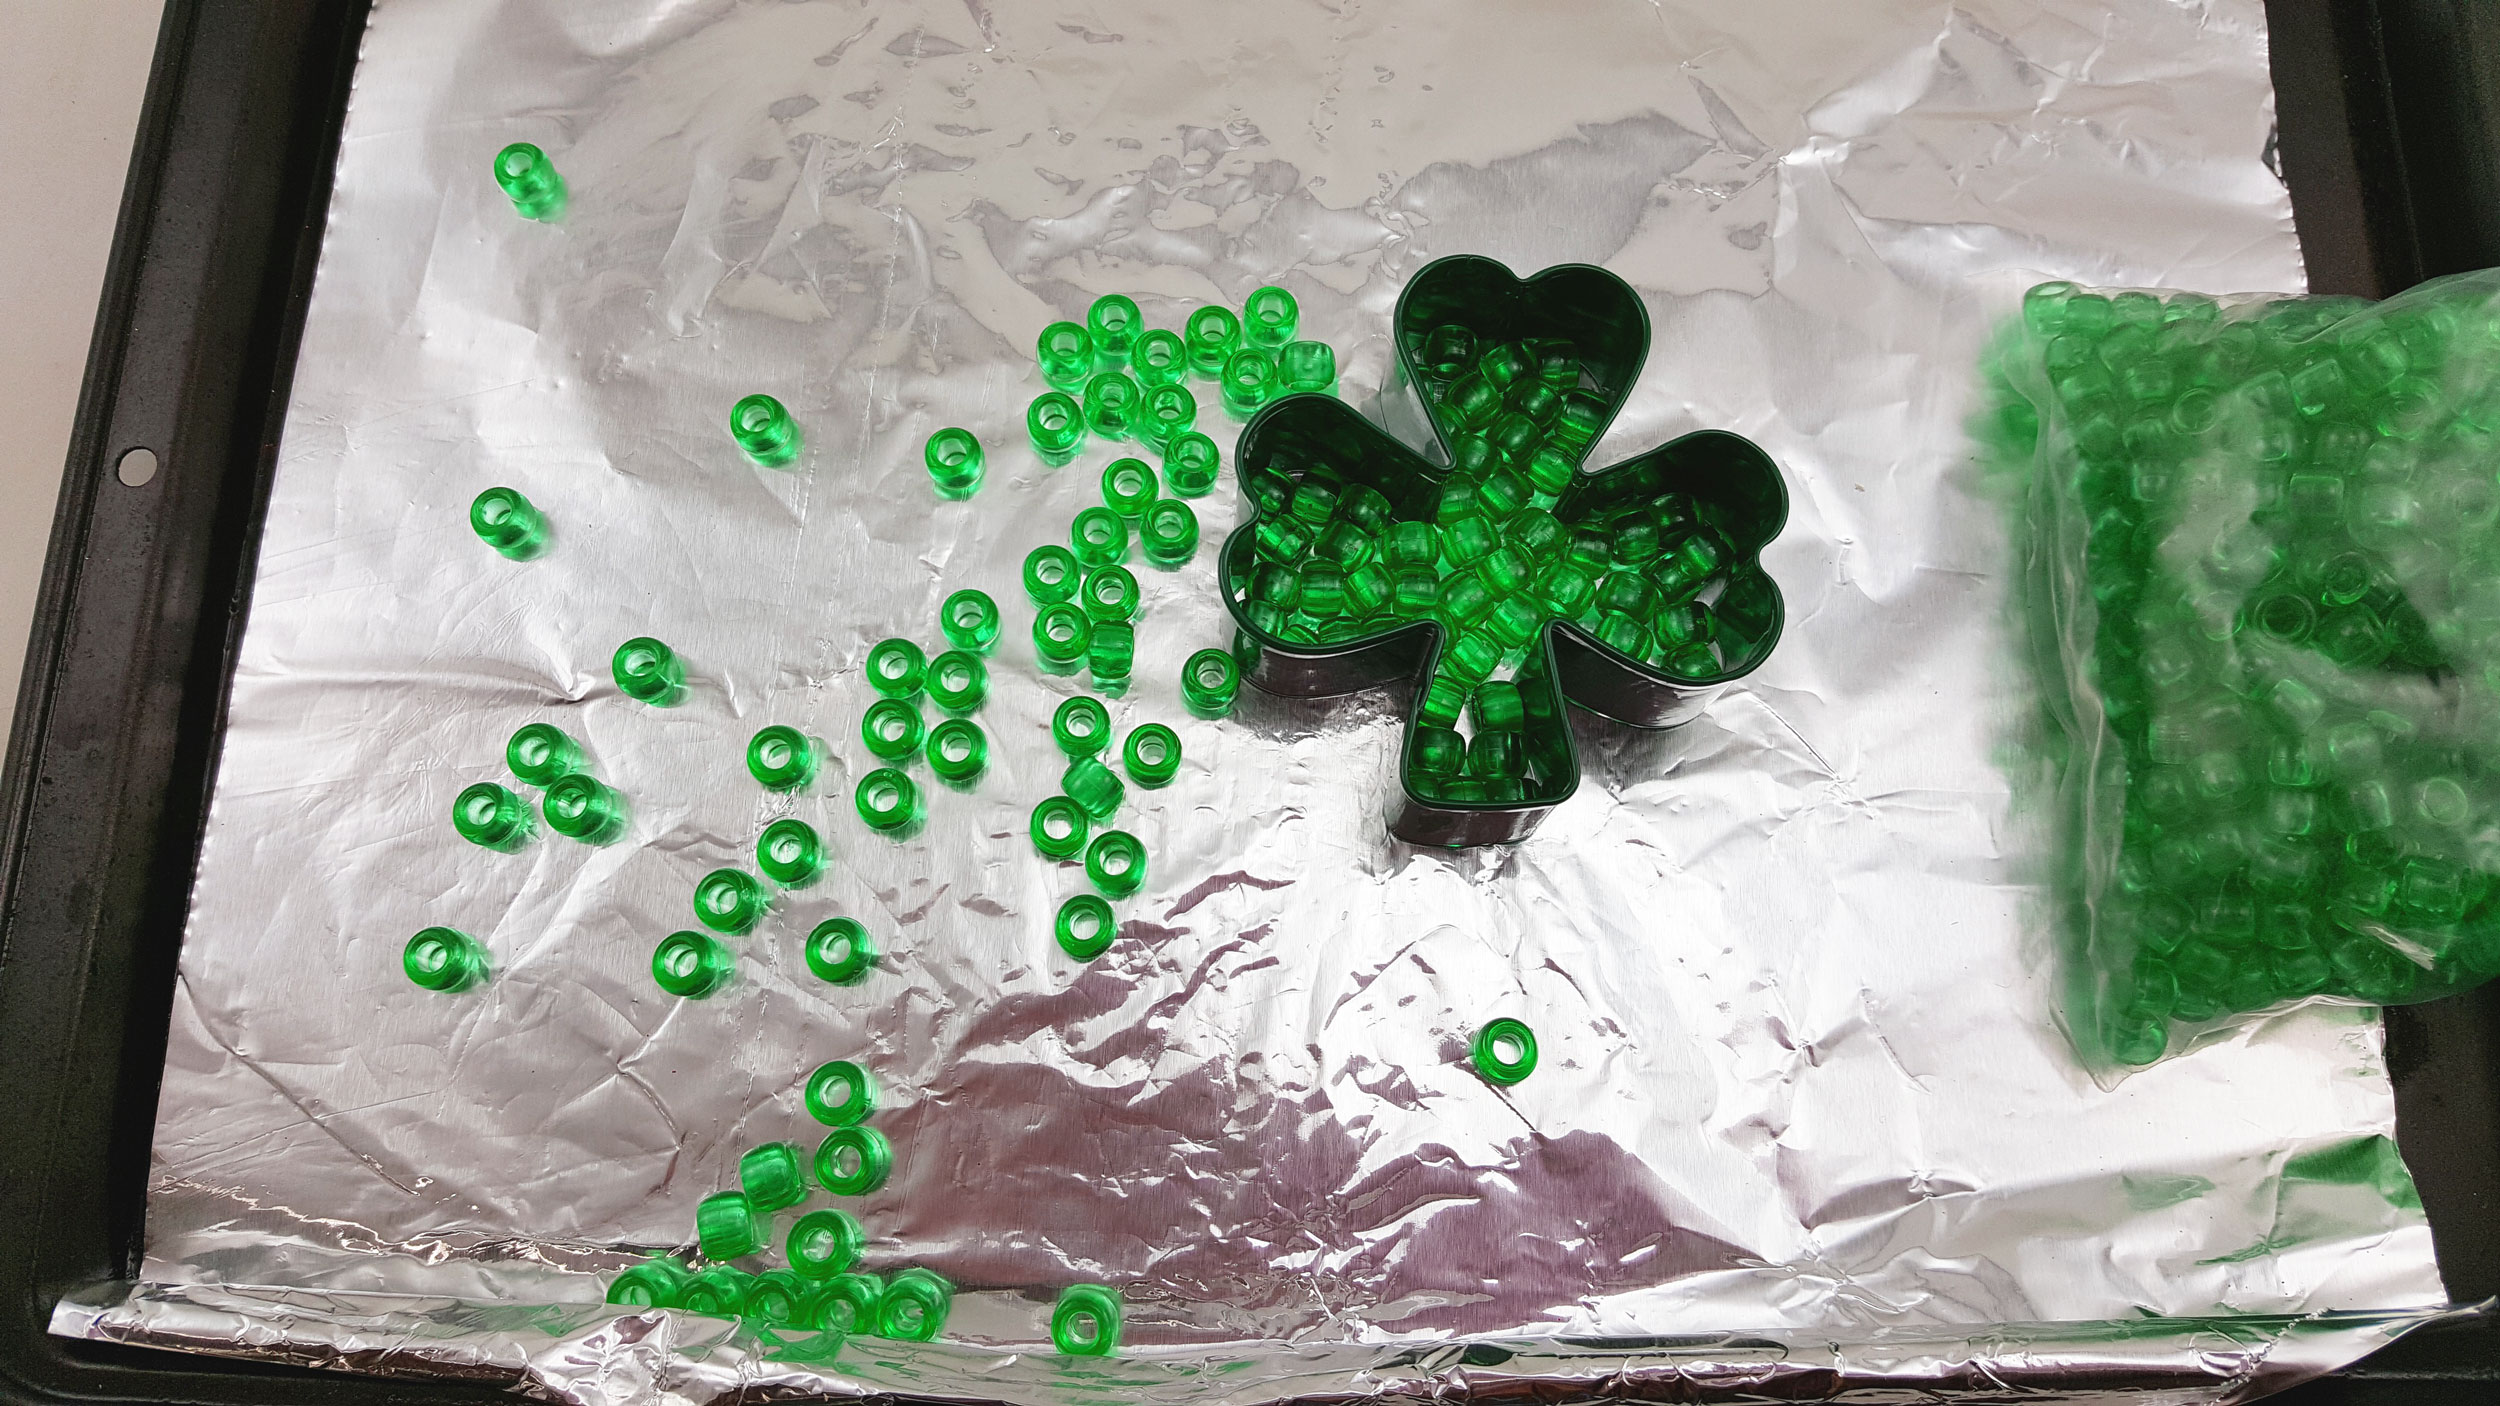 Step 1 is to place your metal clover cookie cutter on the foil and fill it with beads. | OrnamentShop.com